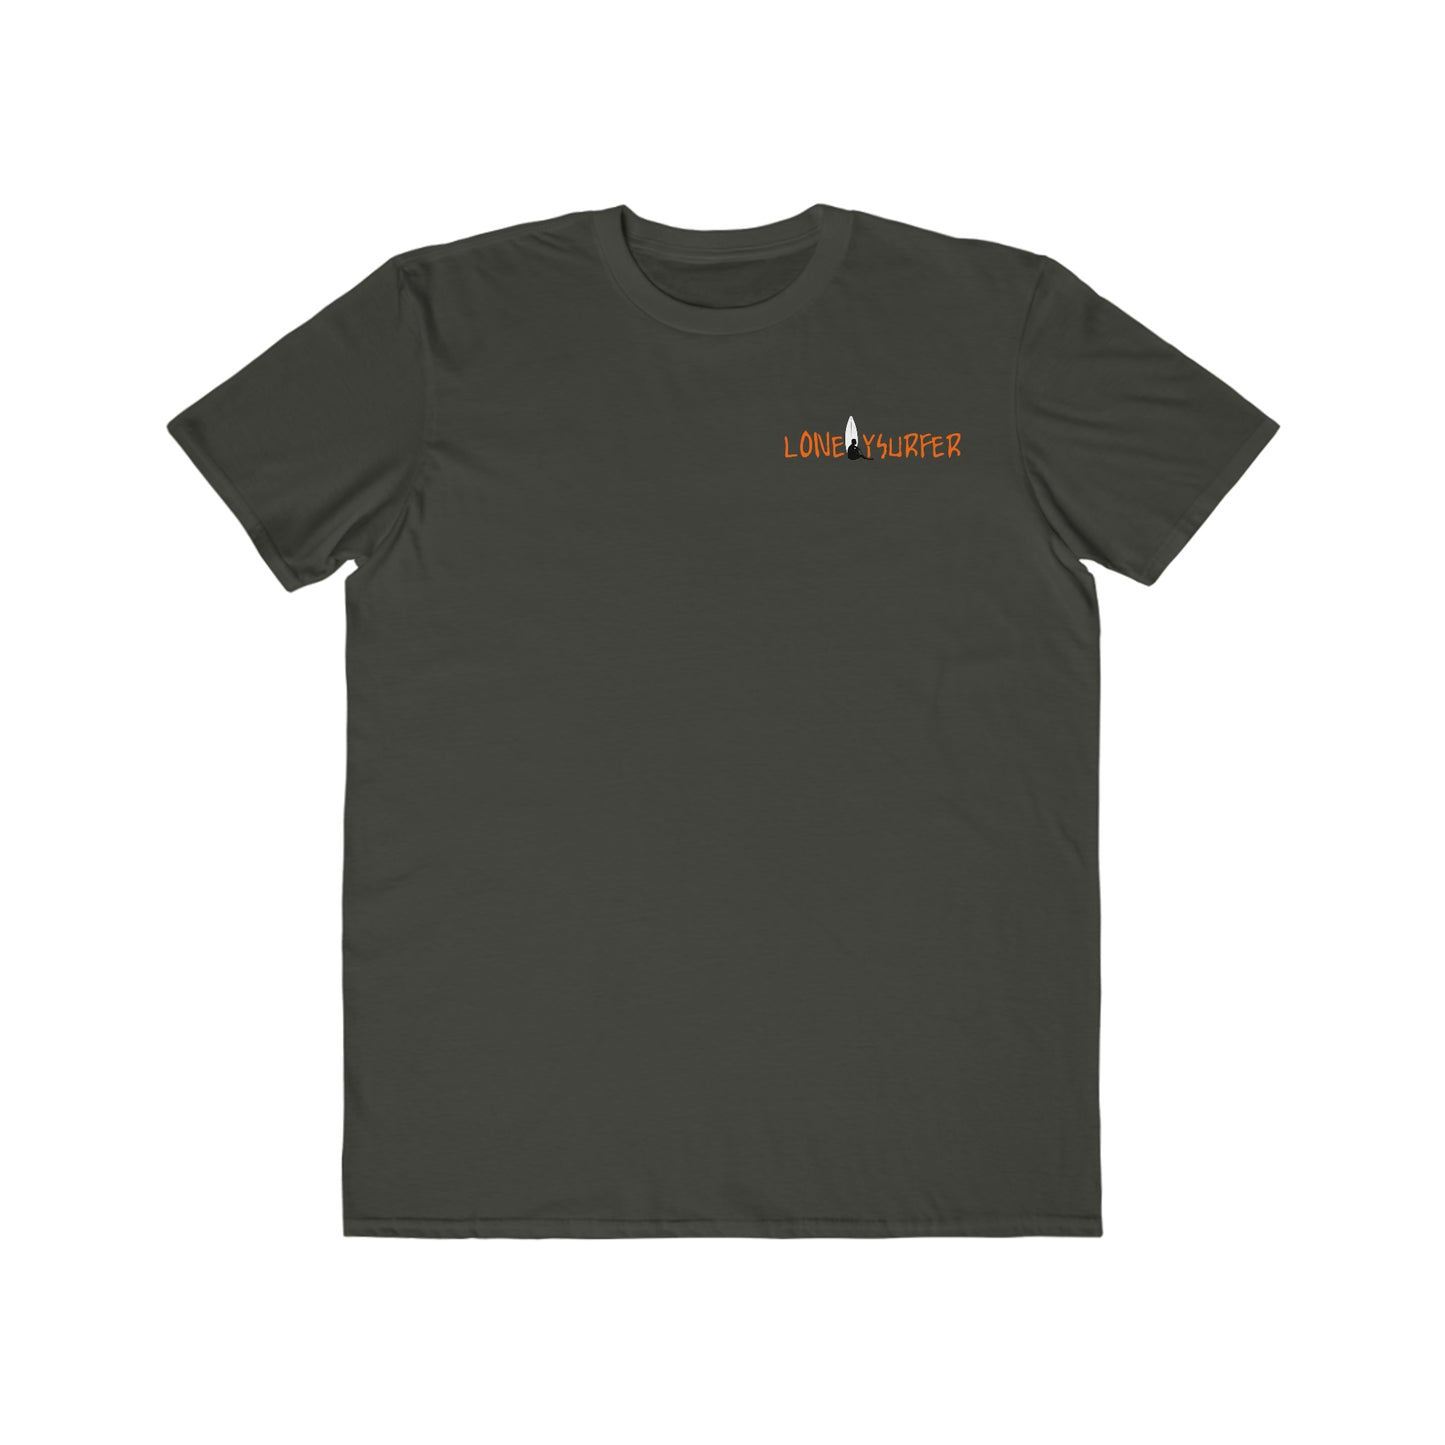 LonelySurfer Grieving Ghost Tee - Charcoal